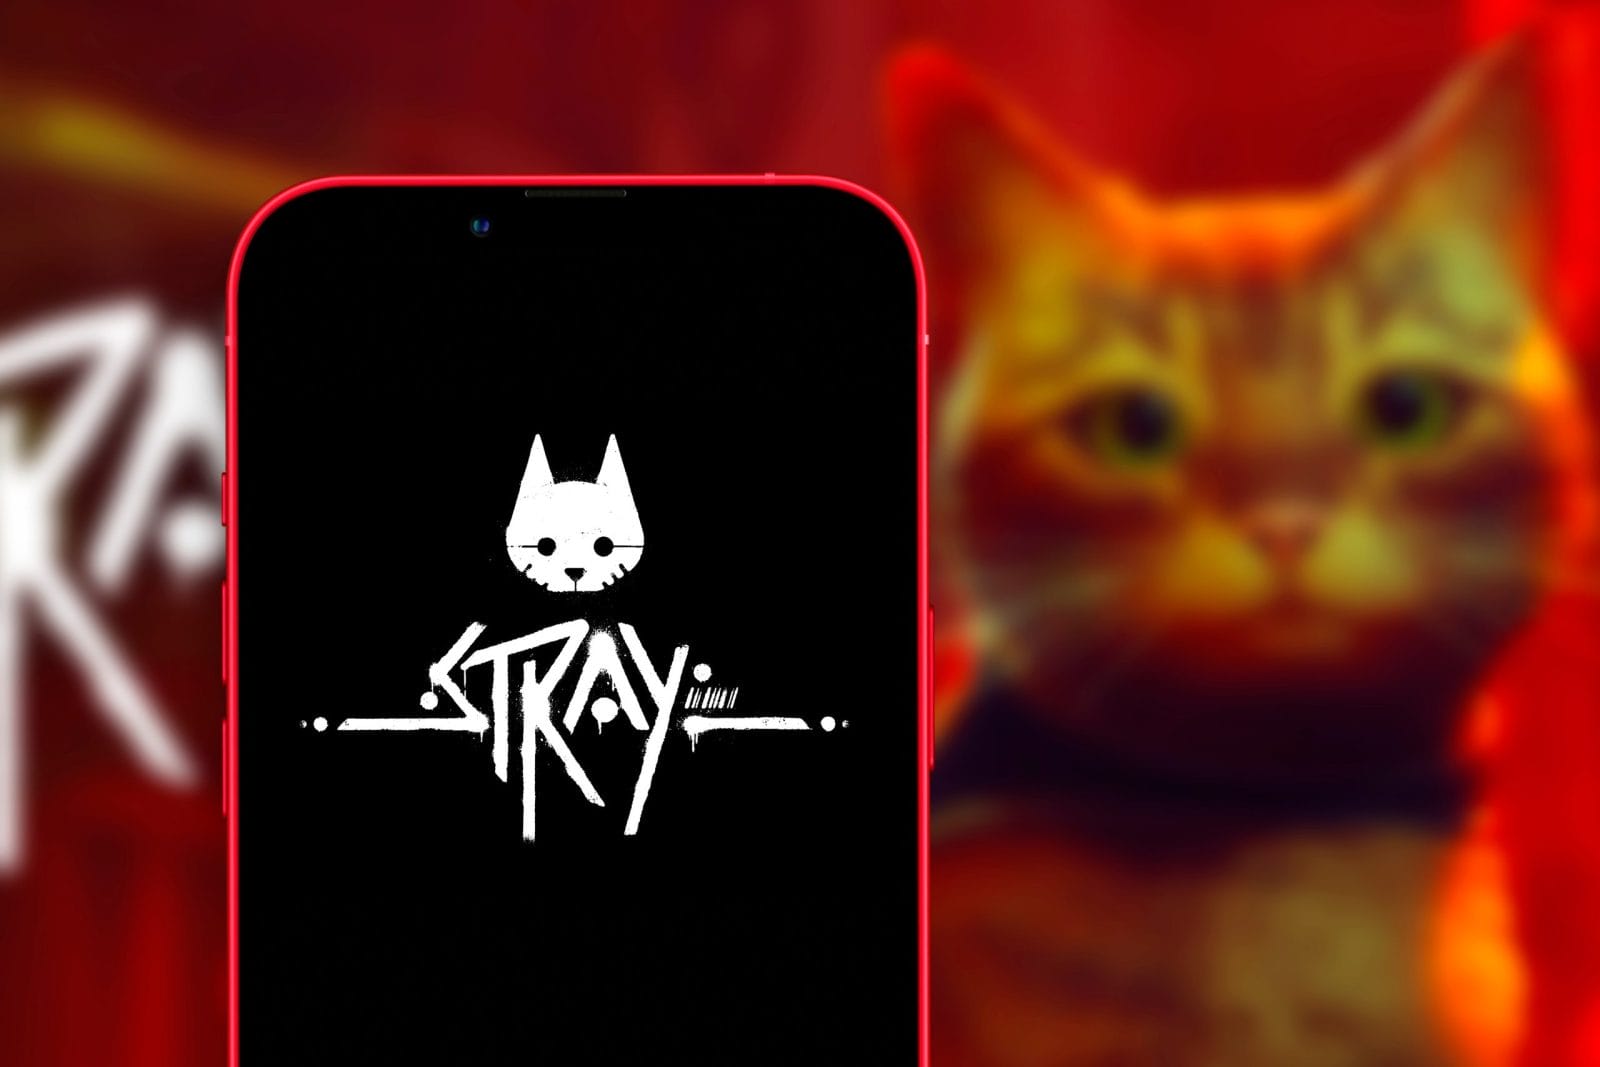 Stray video game on phone screen with cat in background